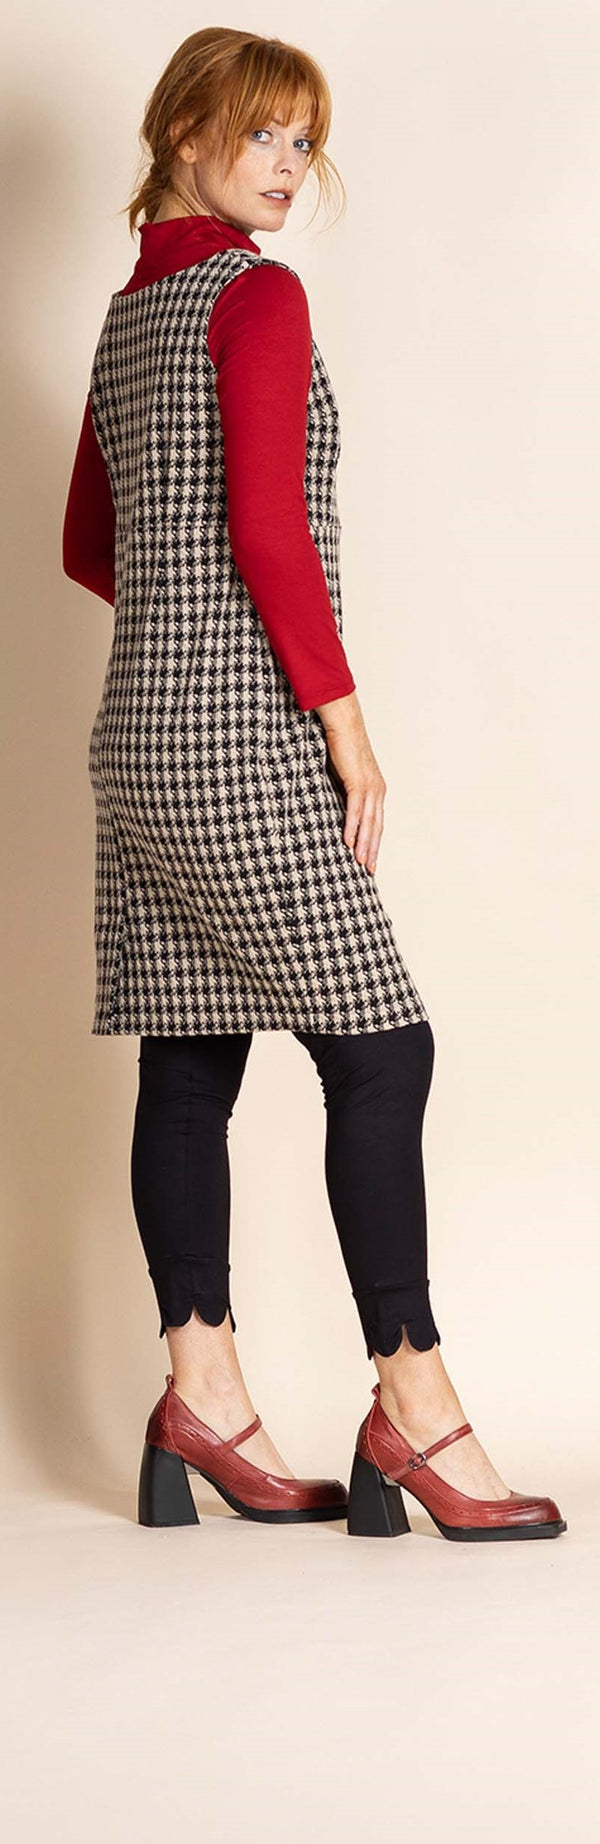 HOUNDSTOOTH TAILORED SHIFT